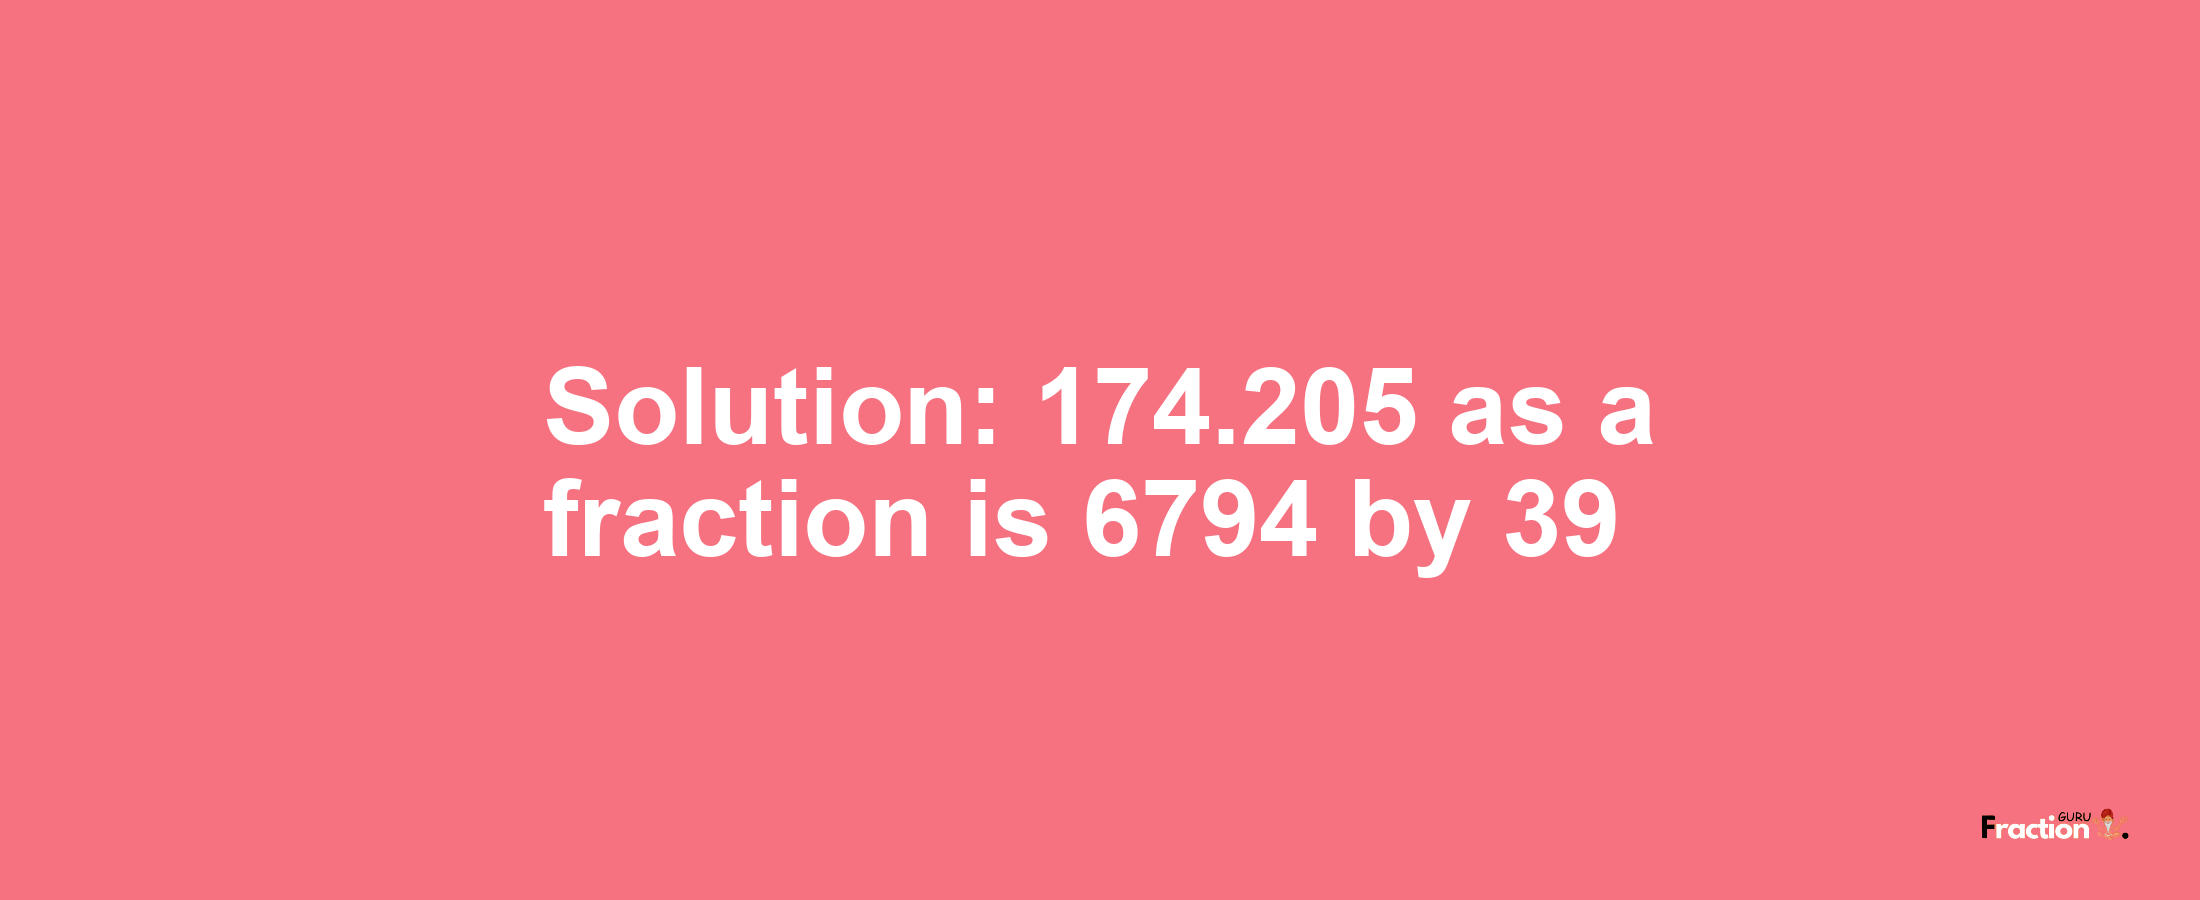 Solution:174.205 as a fraction is 6794/39